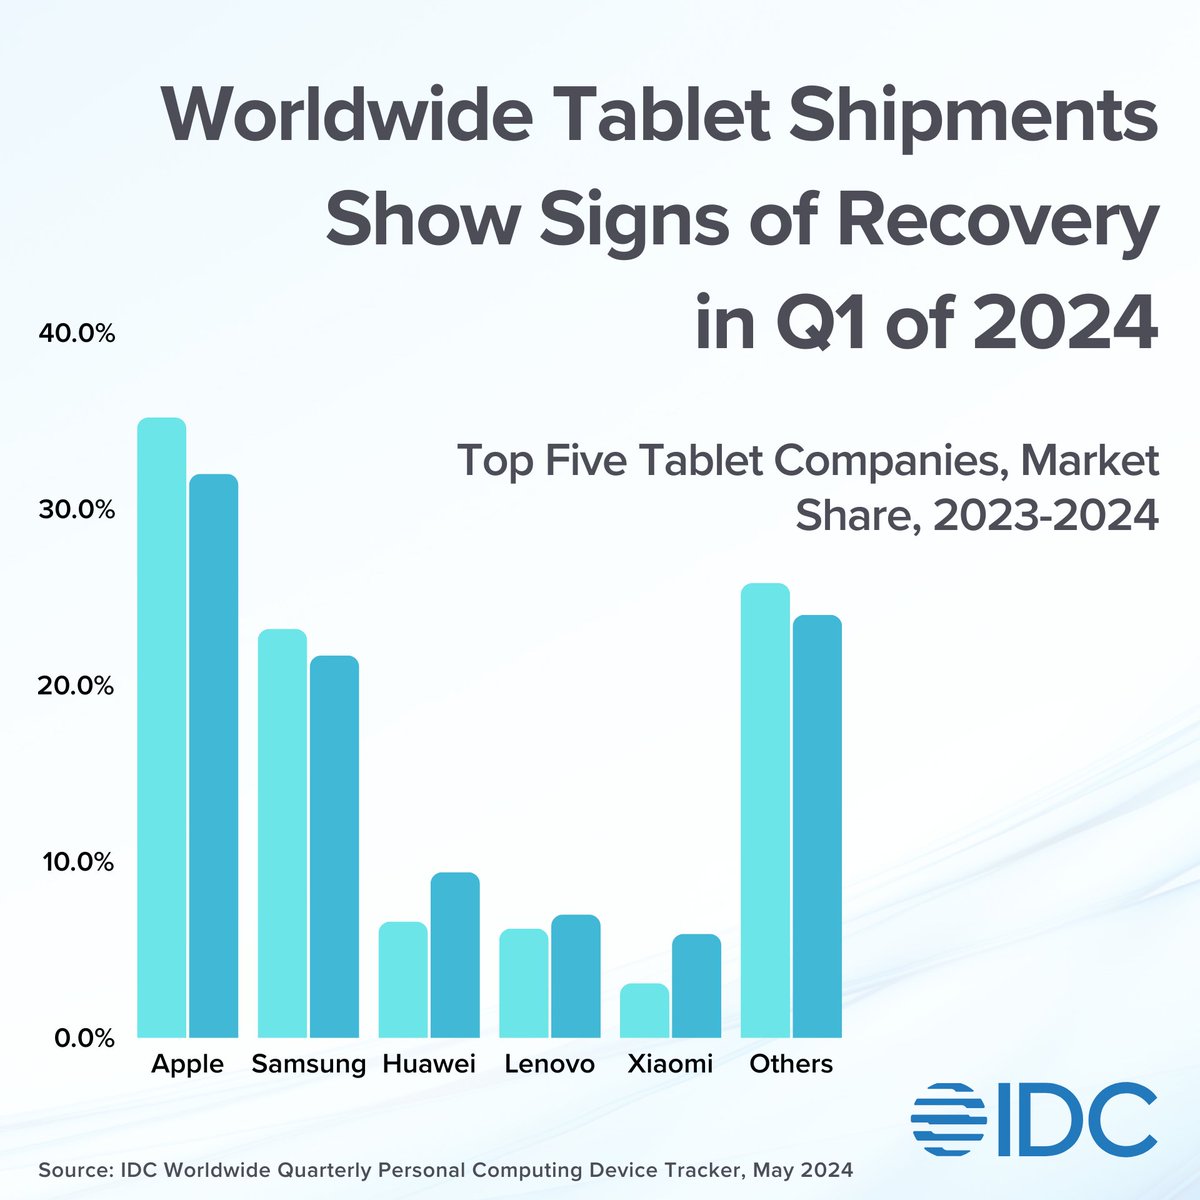 After more than two years of decline, worldwide tablet shipments posted modest year-over-year growth of 0.5% in the first quarter of 2024, totaling 30.8 million units, according to IDC's latest press release. Learn more: ow.ly/uwmo50RFVnS